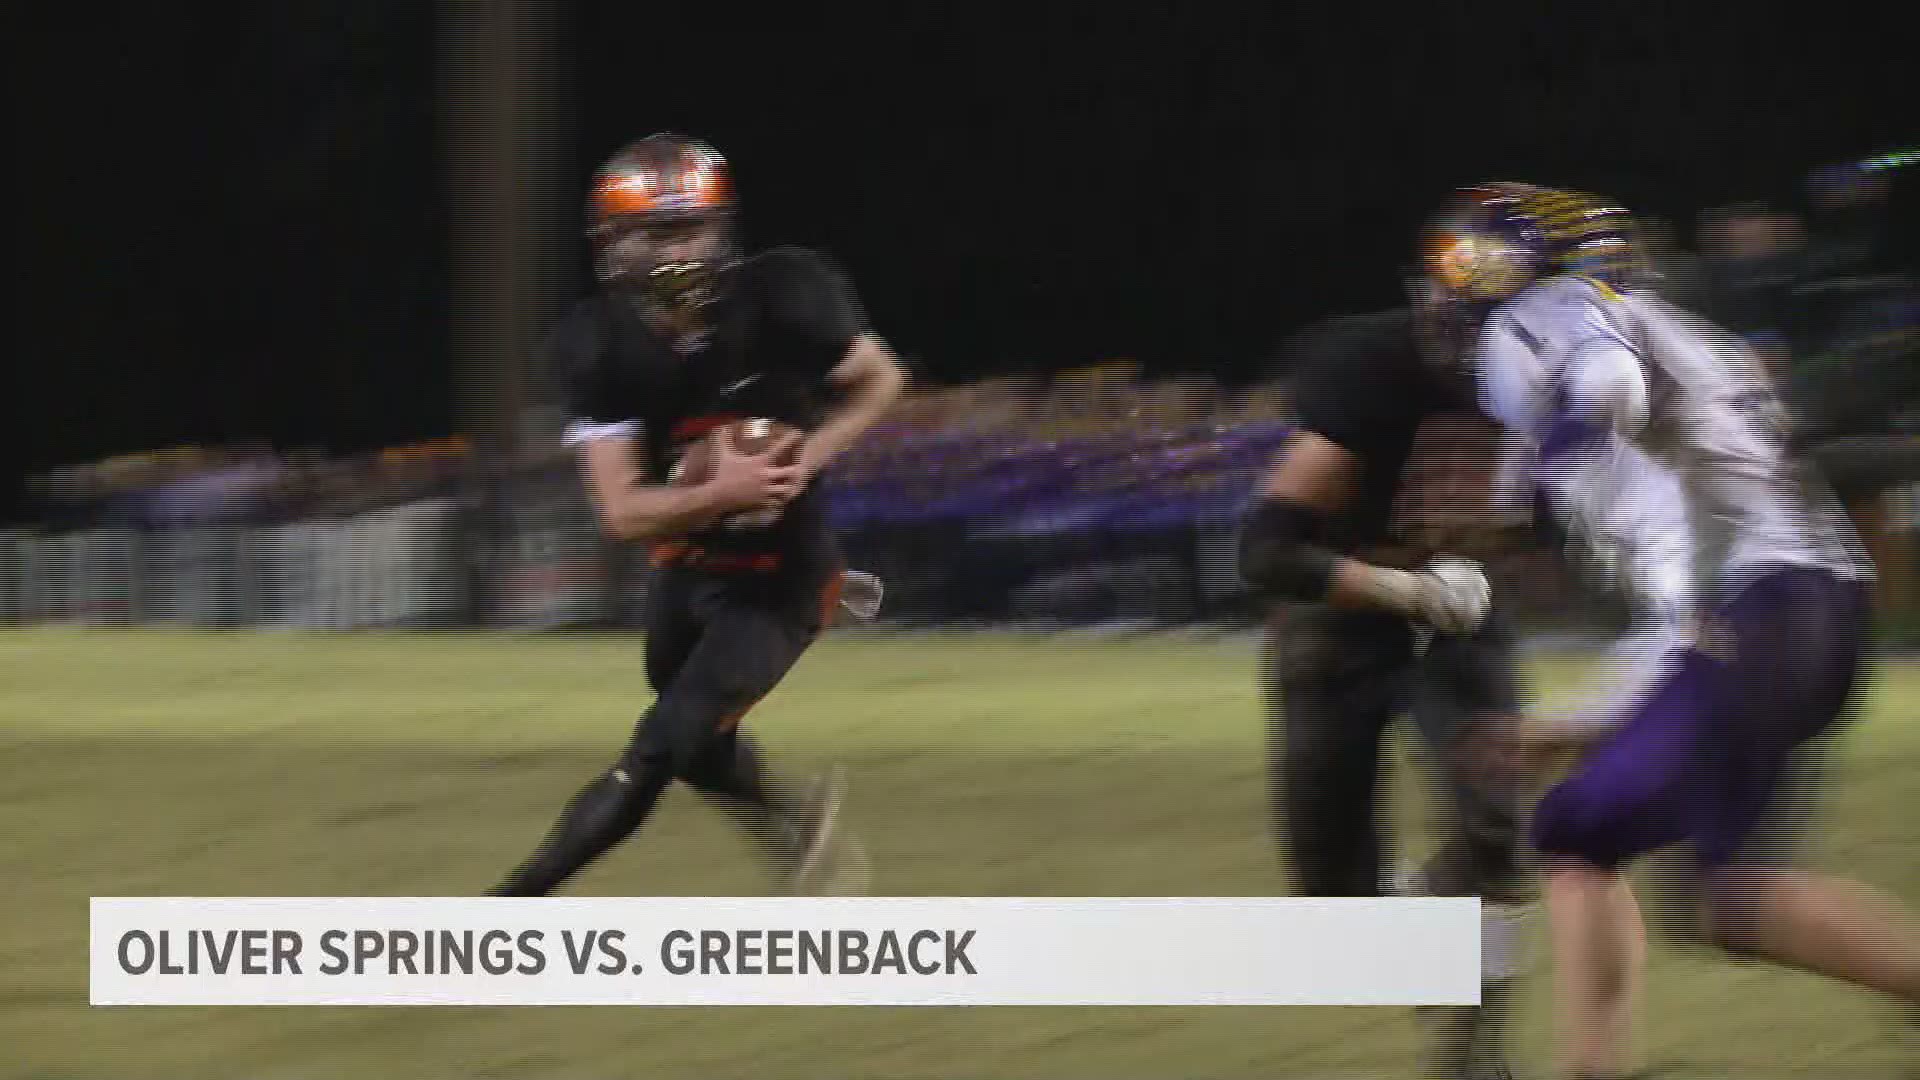 Greenback stays undefeated with a 33-12 win over Oliver Springs.